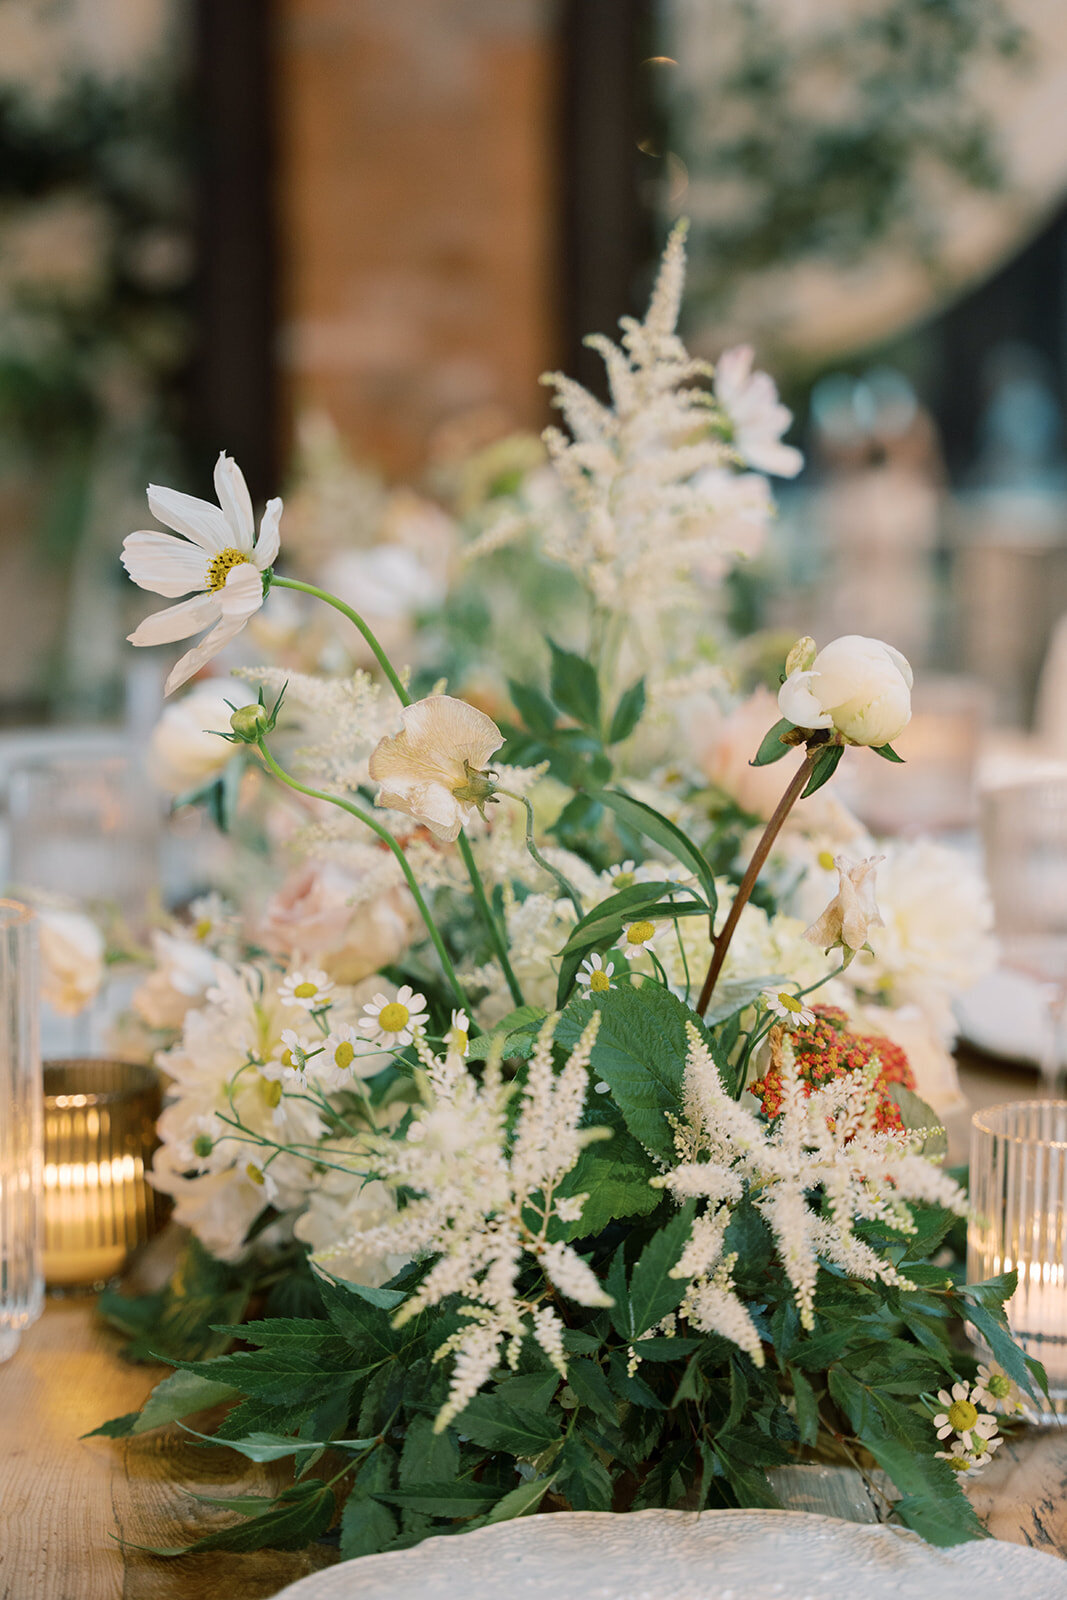 Florals on the table including white astilbe, white peony bud, white cosmos, daisies, cream sweet pea, and wild raspberry leaf.